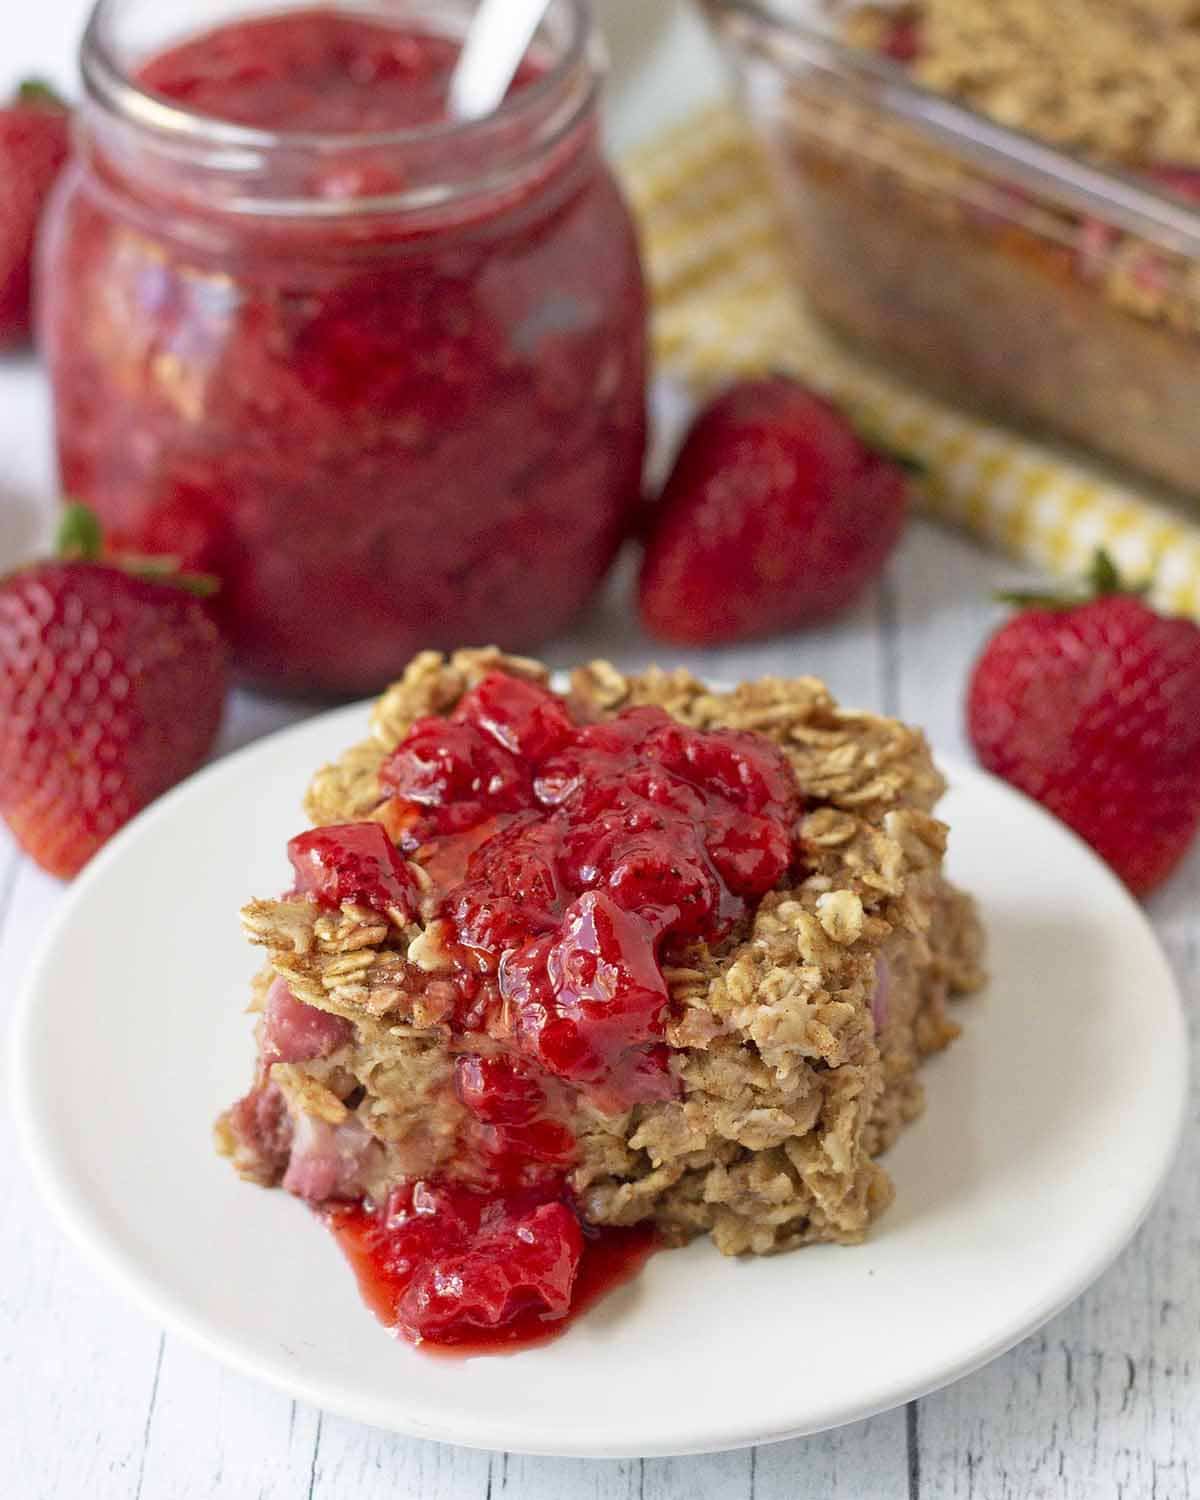 A close up shot showing a slice of egg free baked oatmeal topped with strawberry sauce.